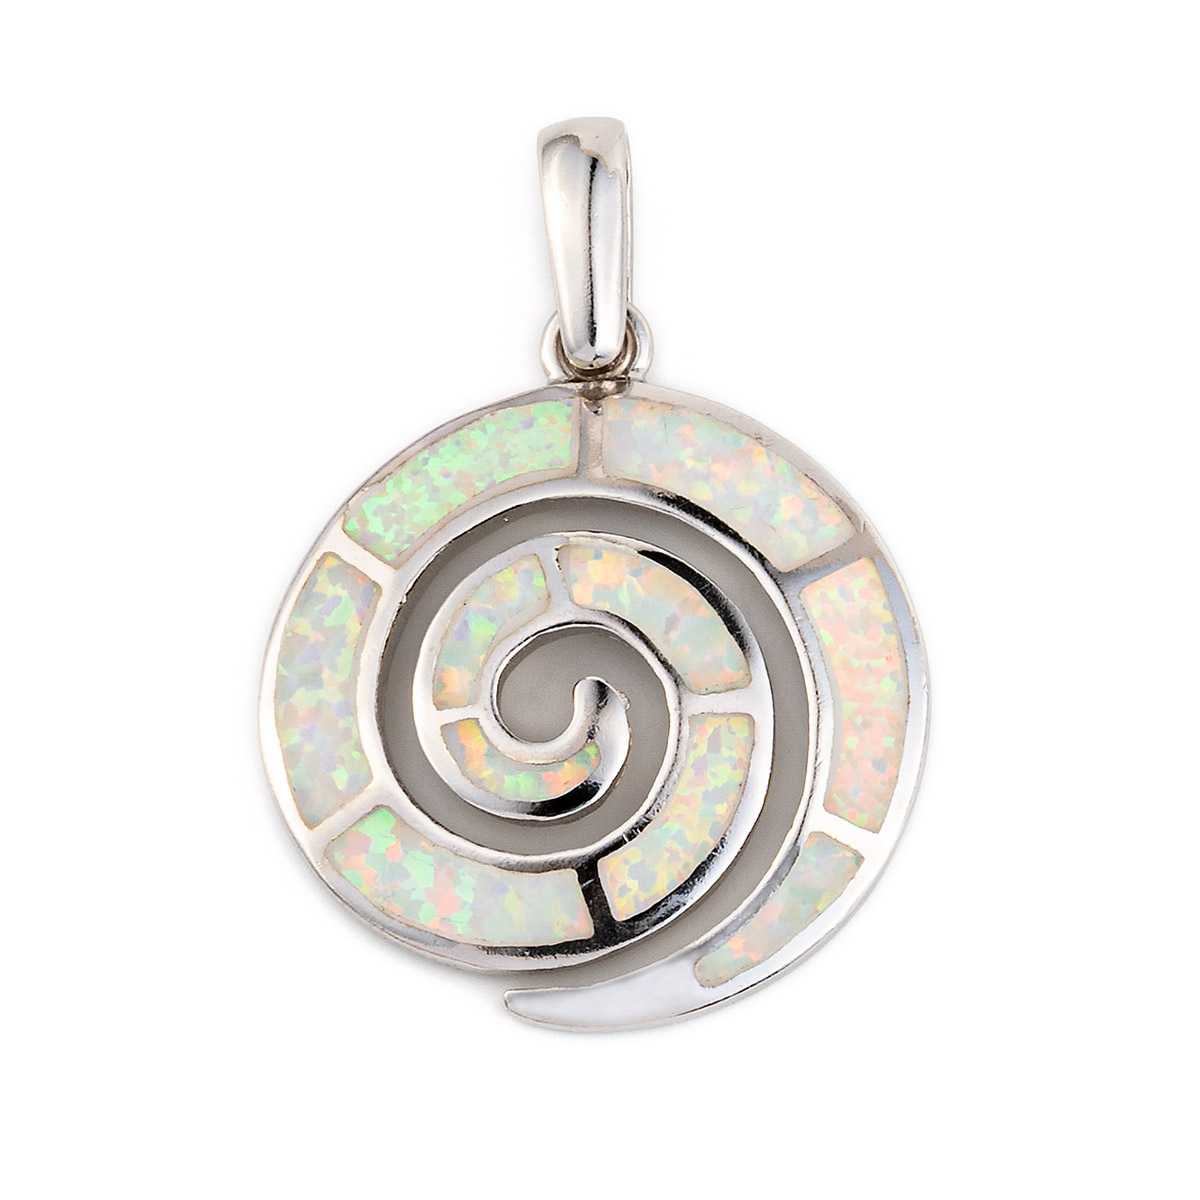 Spiral Pendant - Sterling Silver with White Opal